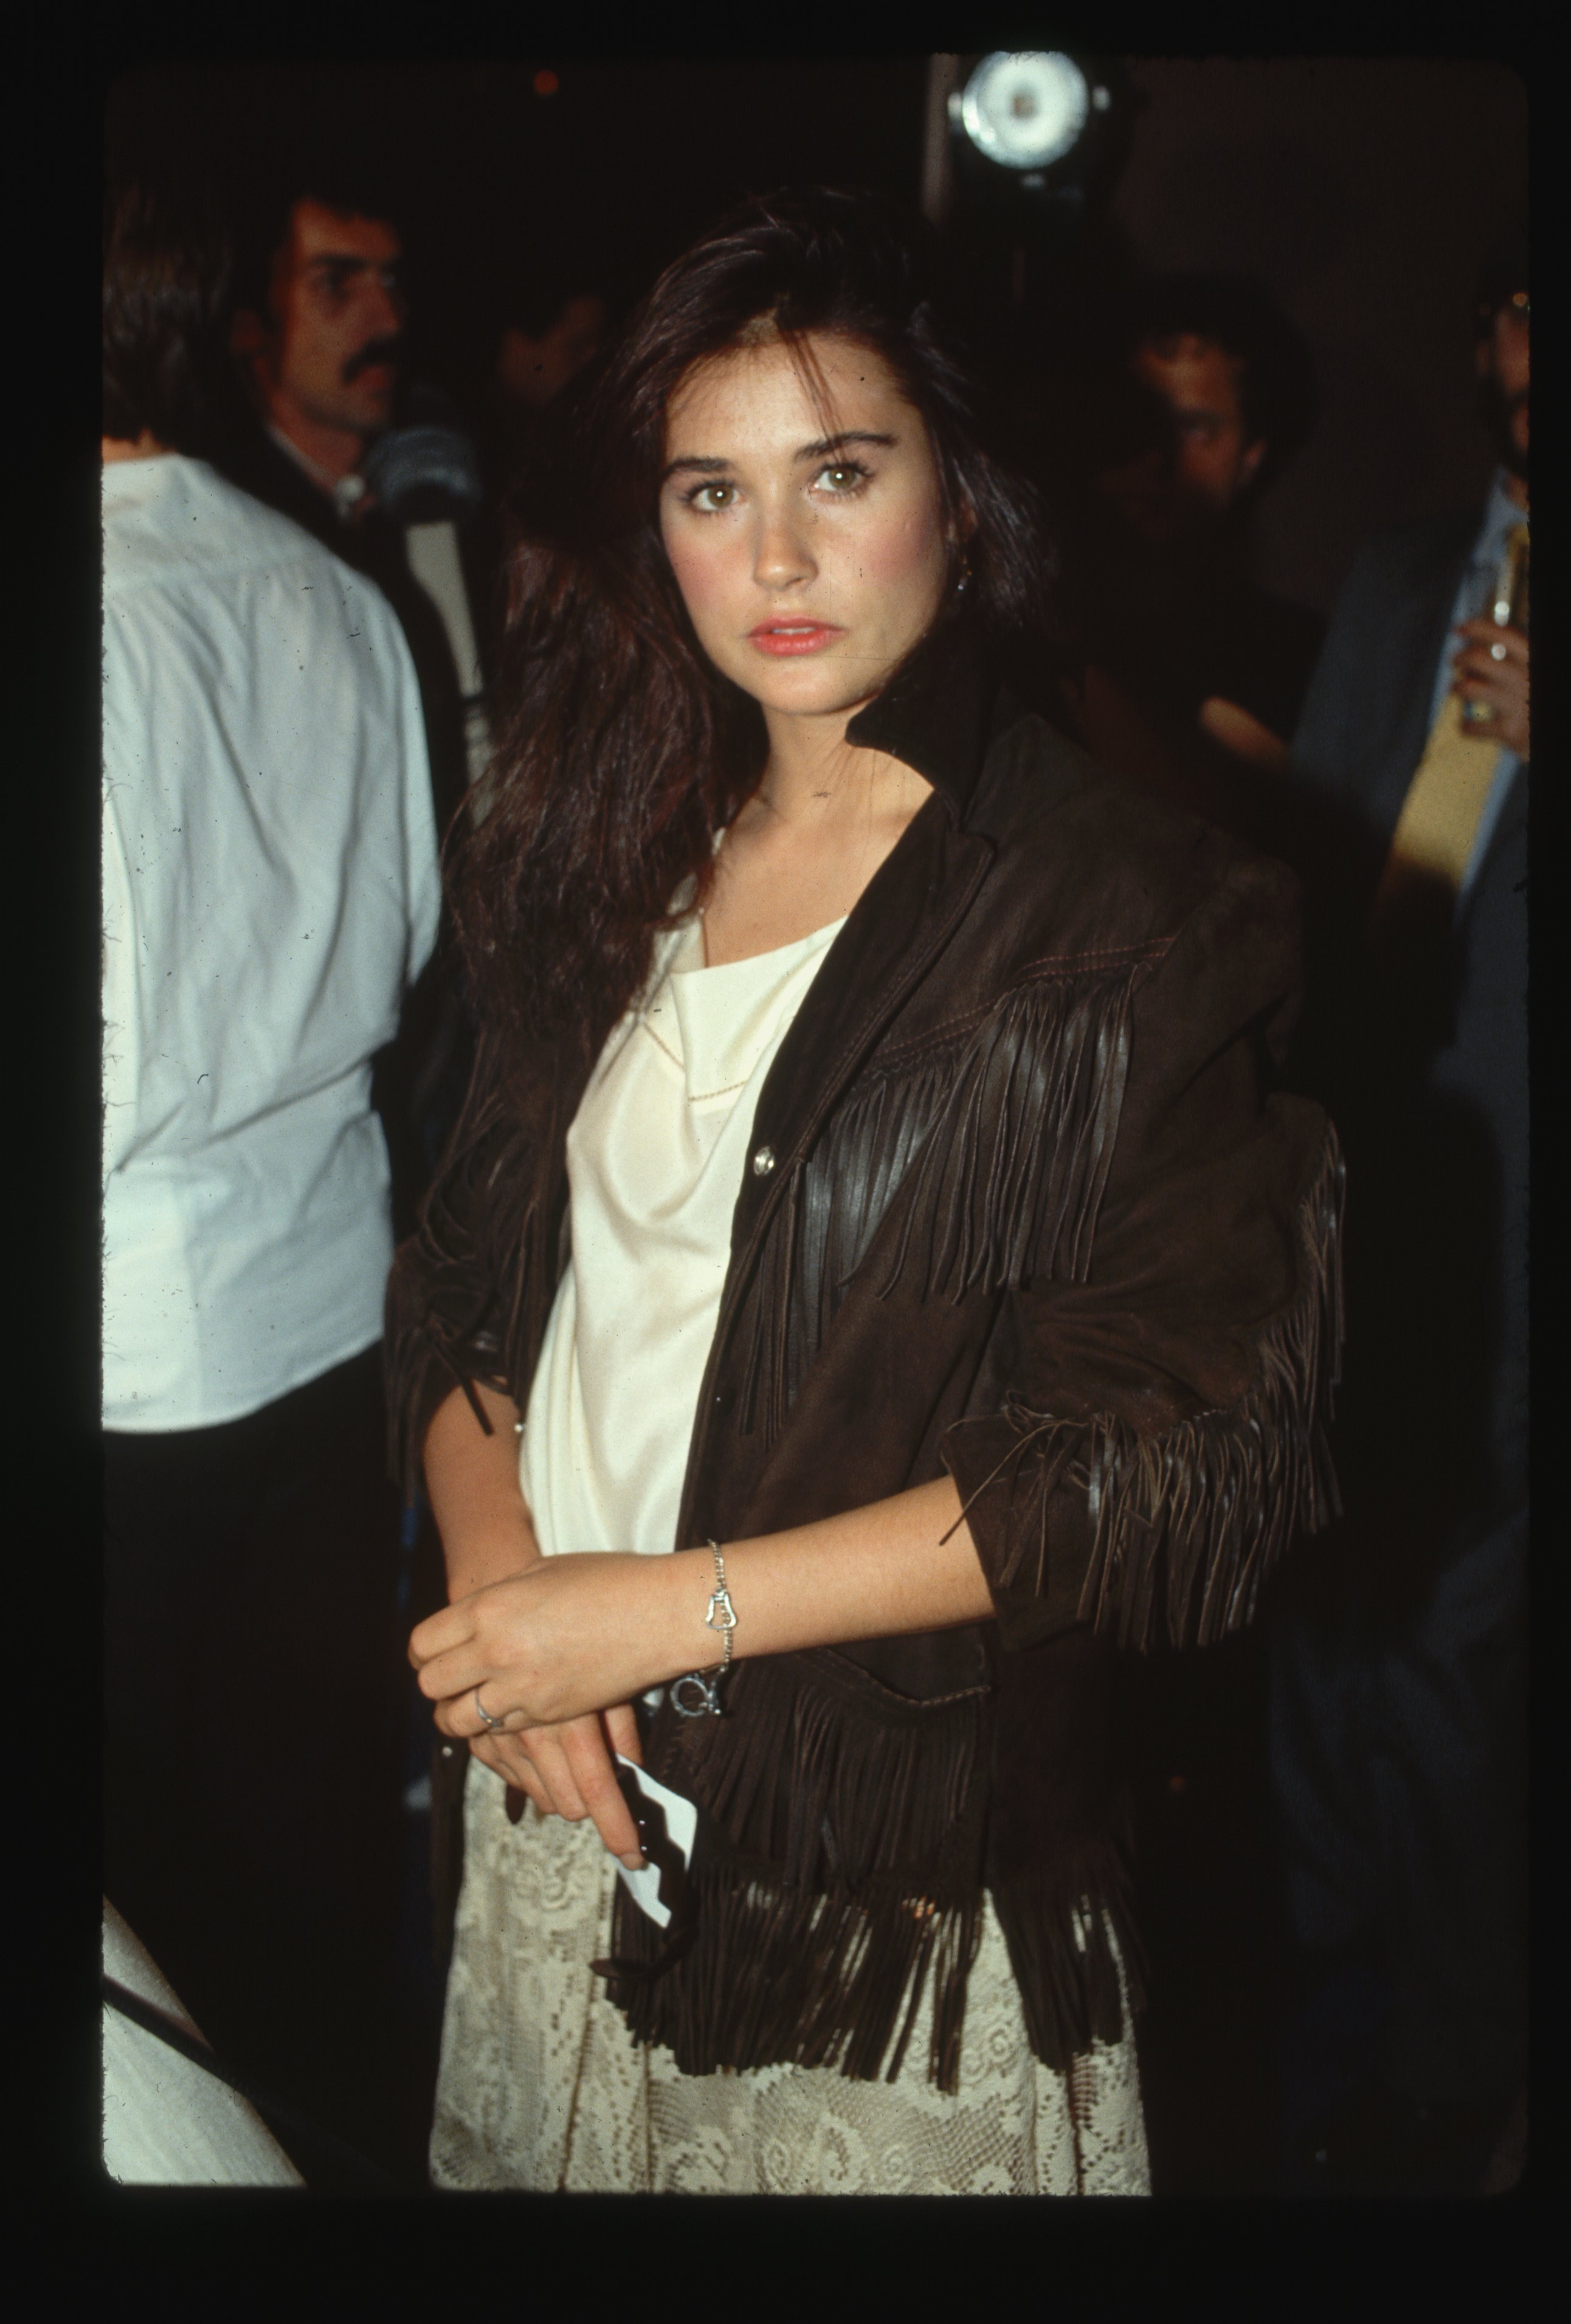 Demi Moore pictured wearing a black fringed, leather coat with a beige outfit in 1985. / Source: Getty Images